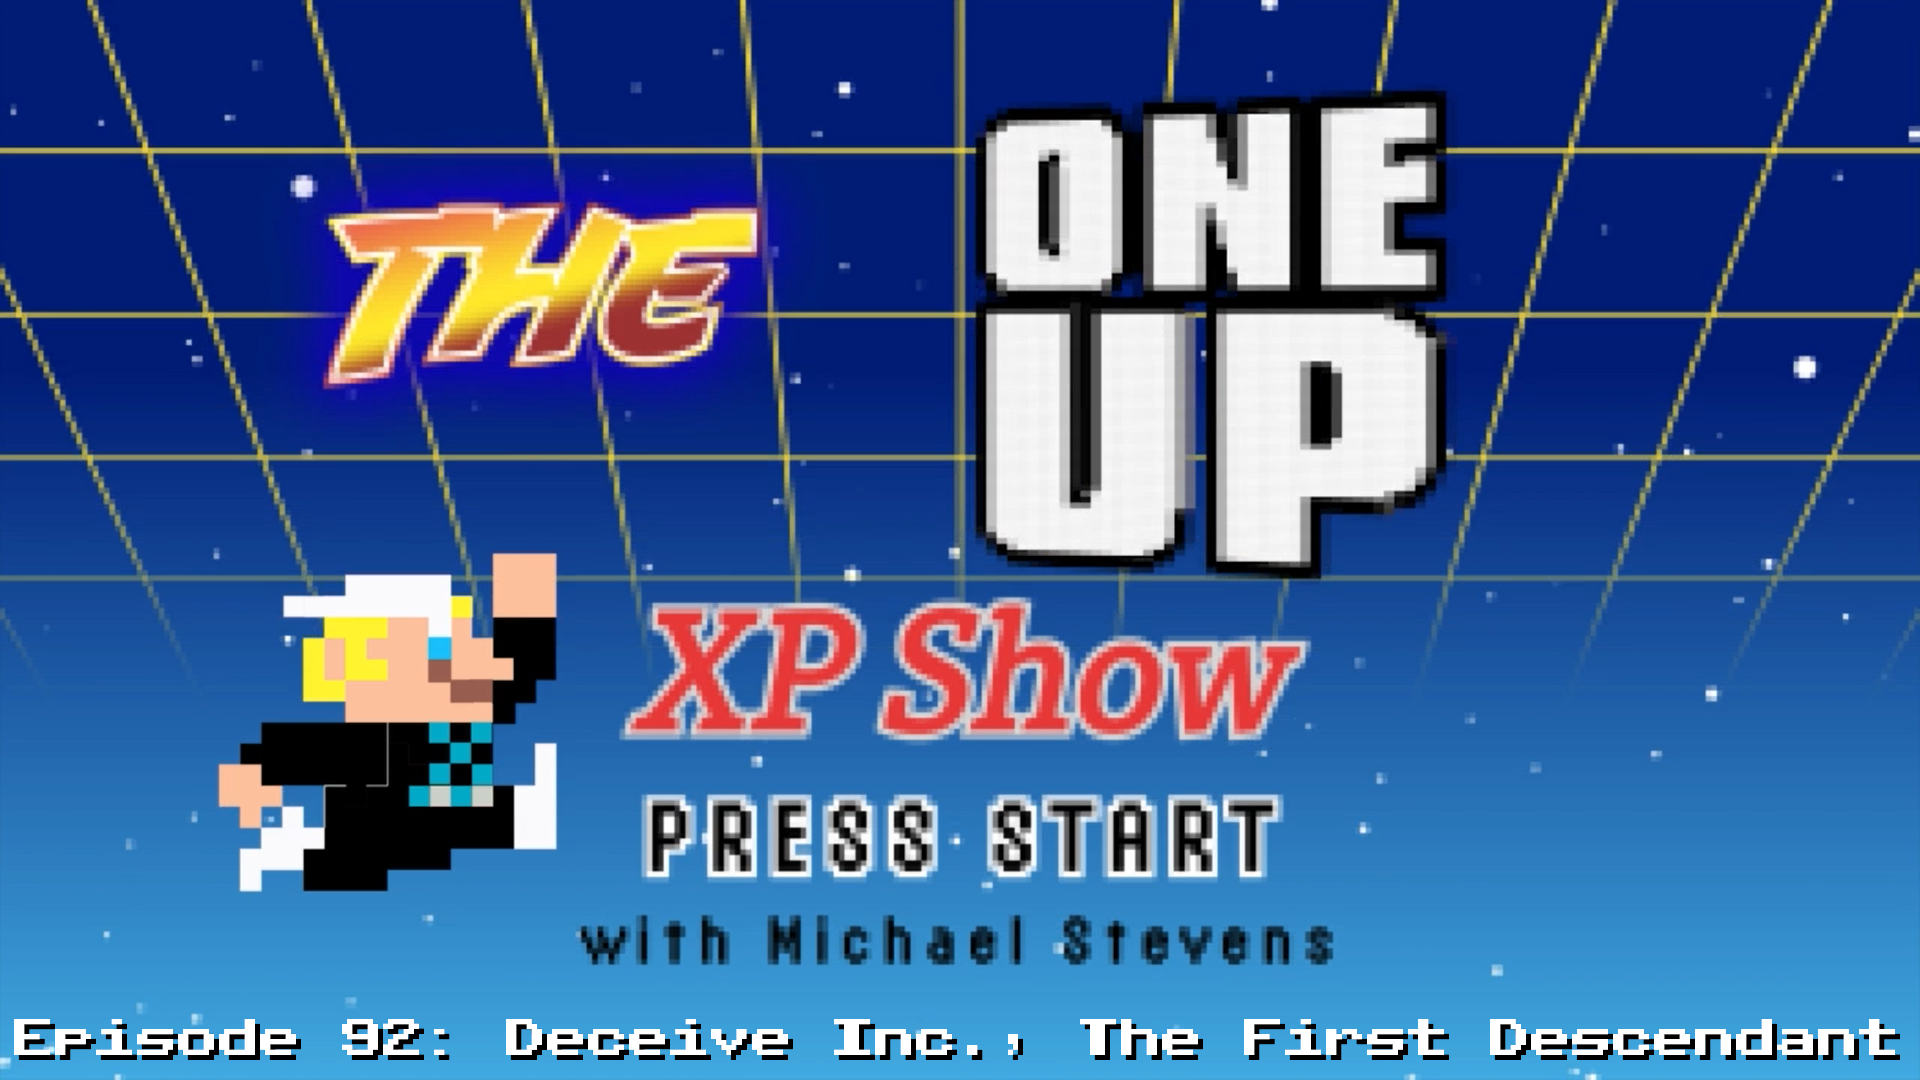 The One Up XP Show - Episode 92: Deceive Inc., The First Descendant